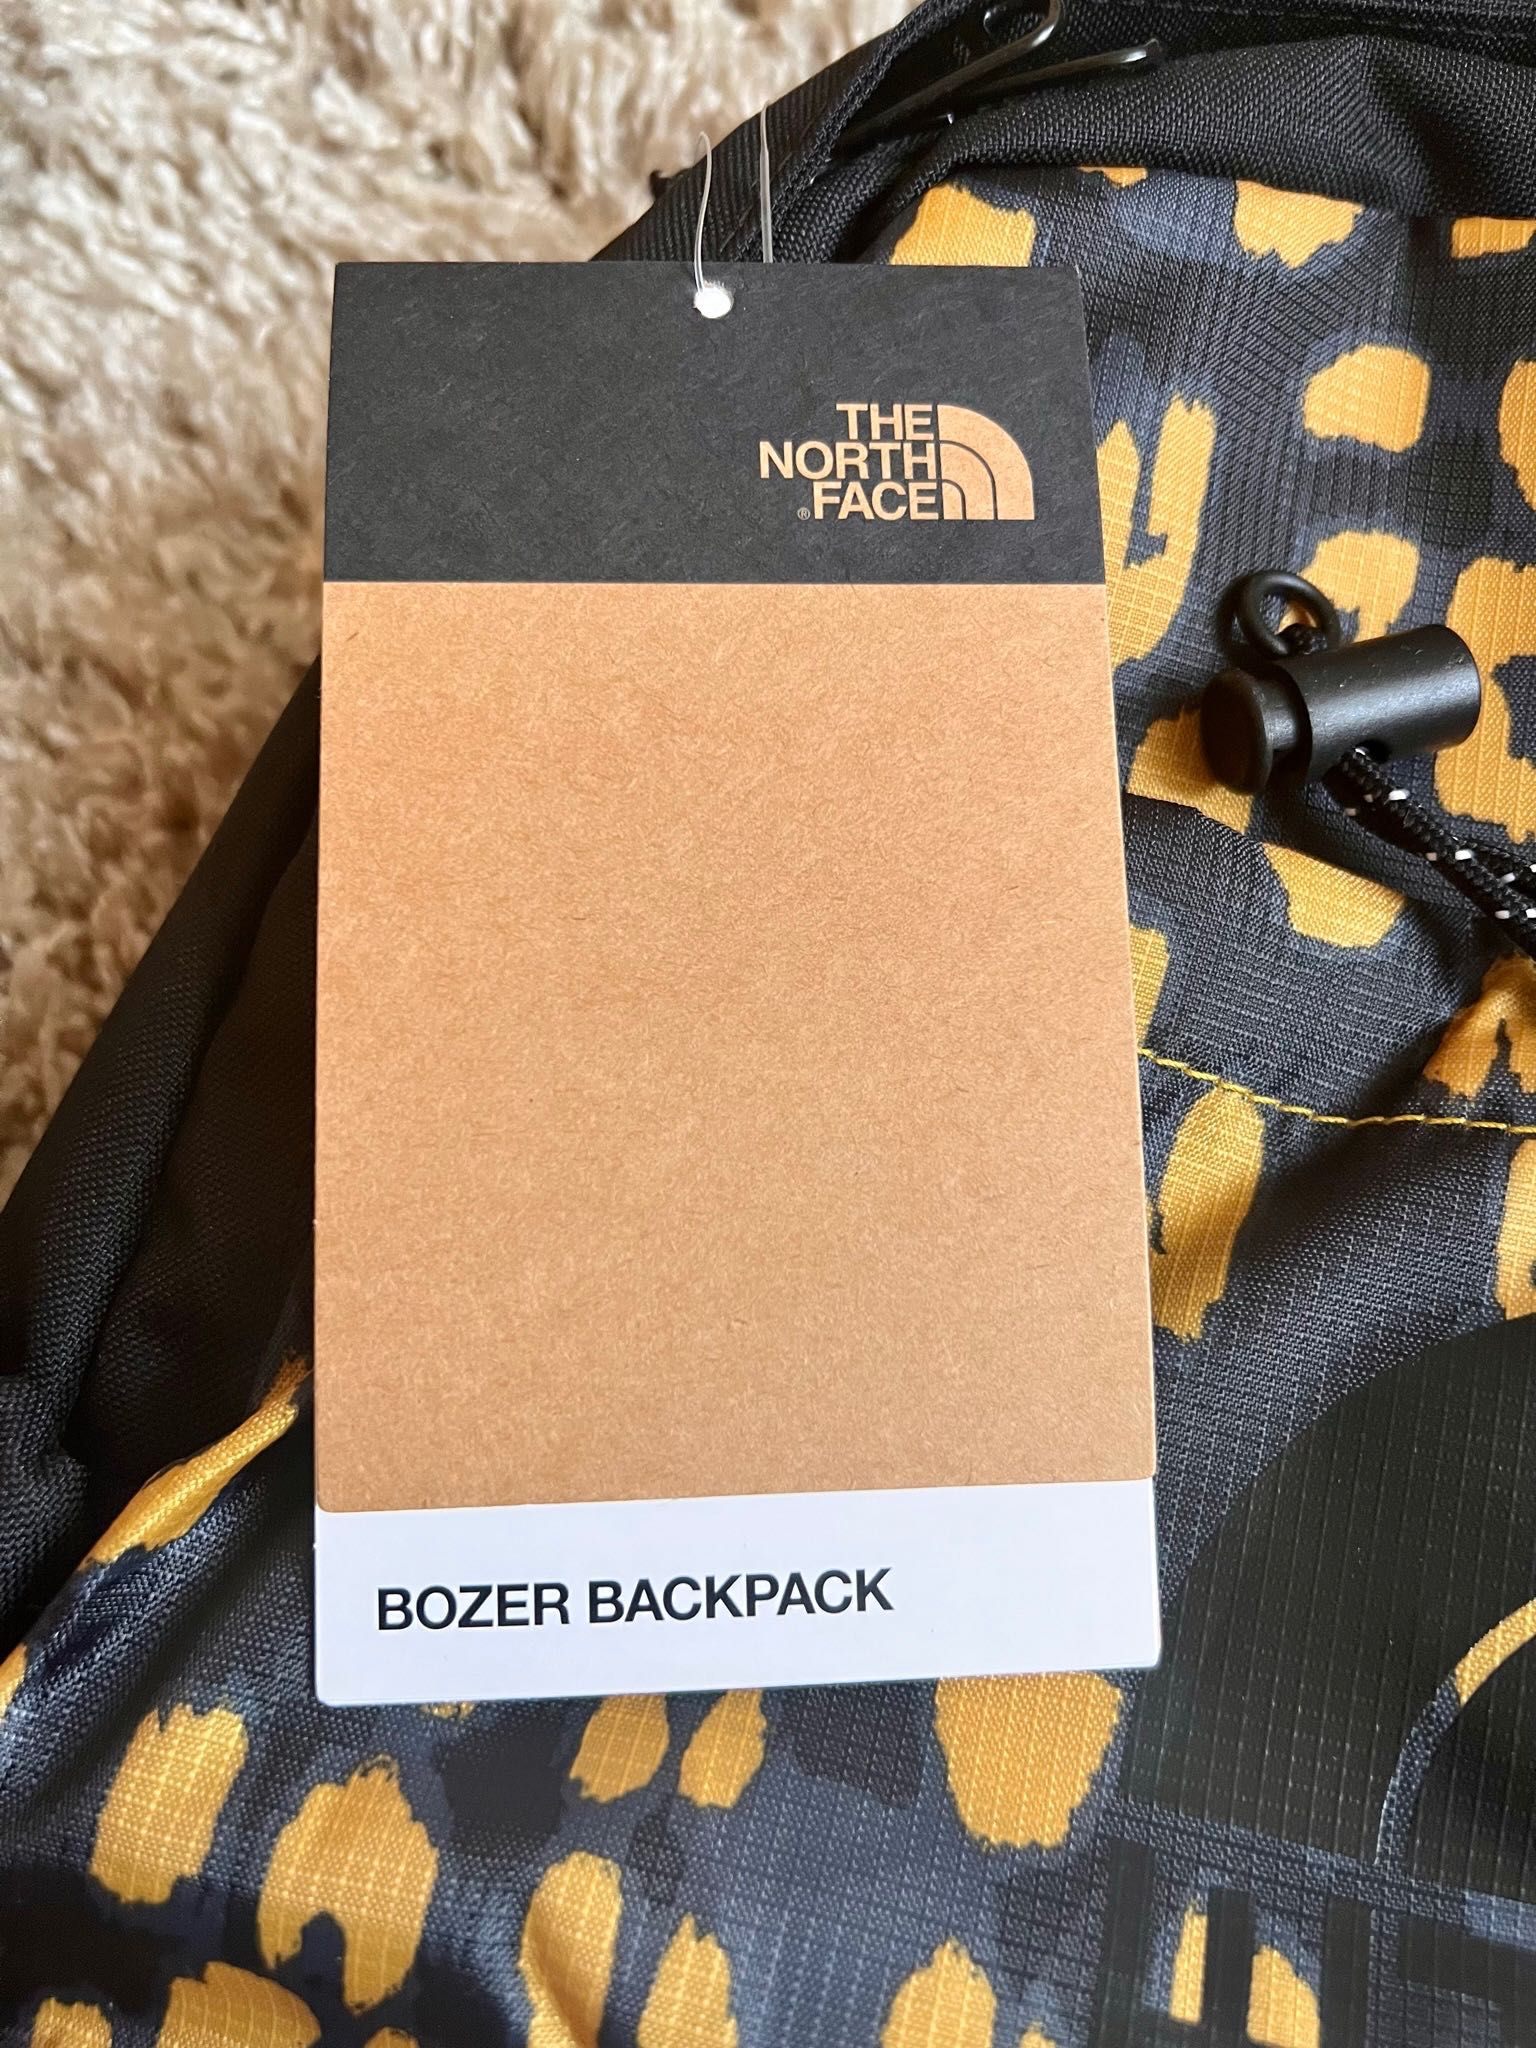 The North Face Bozer backpack